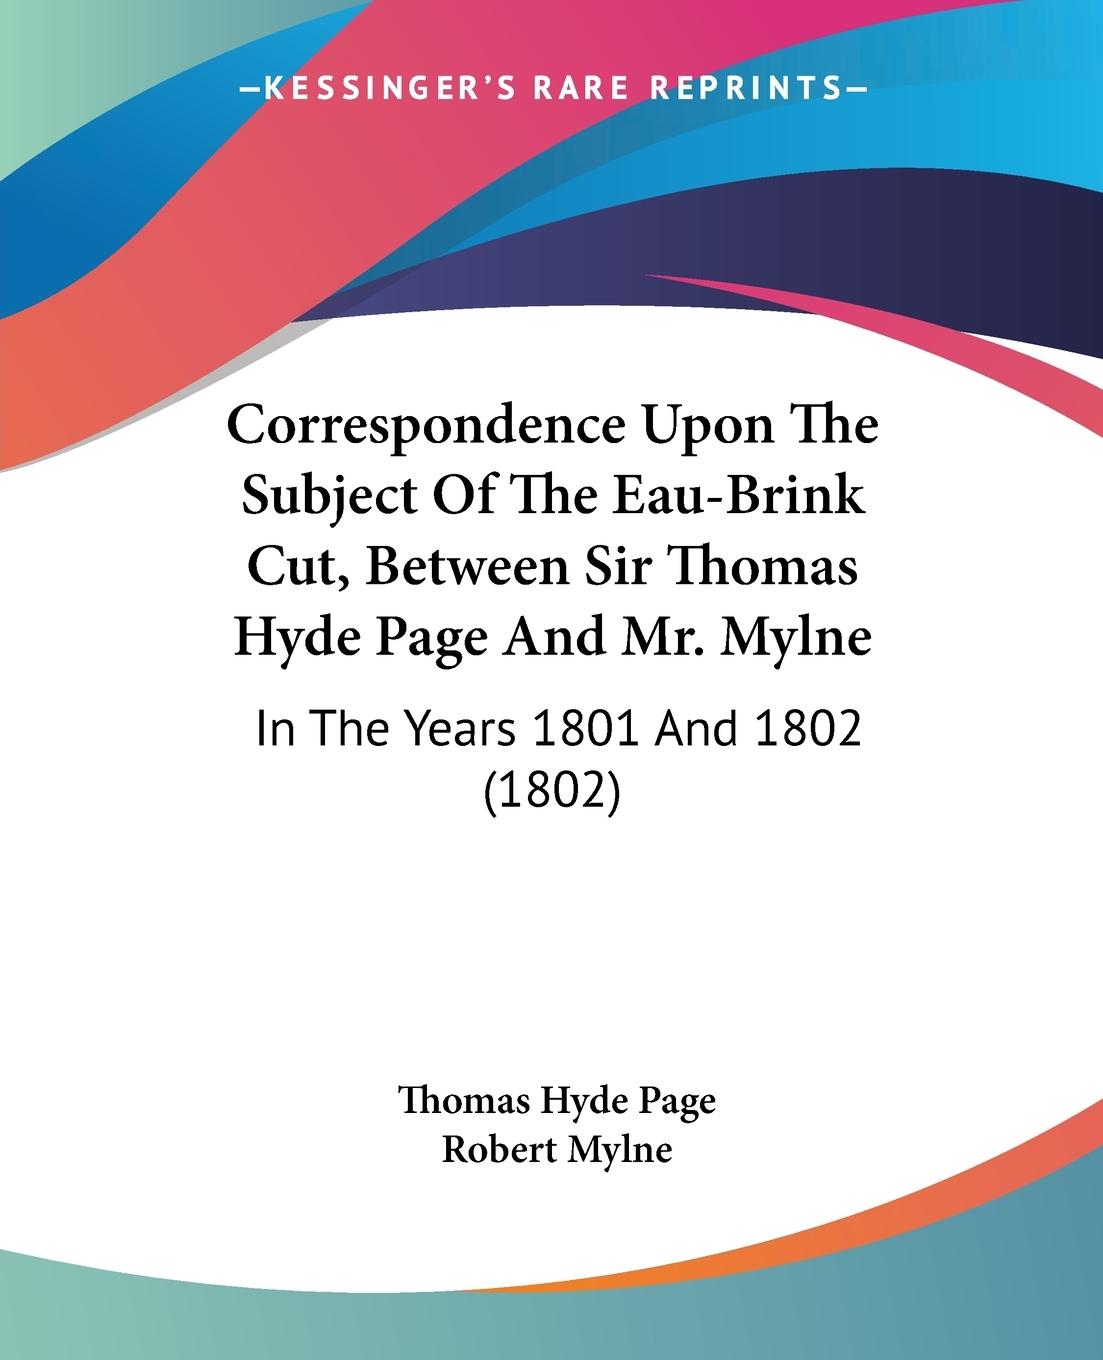 Correspondence Upon The Subject Of The Eau-Brink Cut, Between Sir Thomas Hyde Page And Mr. Mylne - Page, Thomas Hyde Mylne, Robert